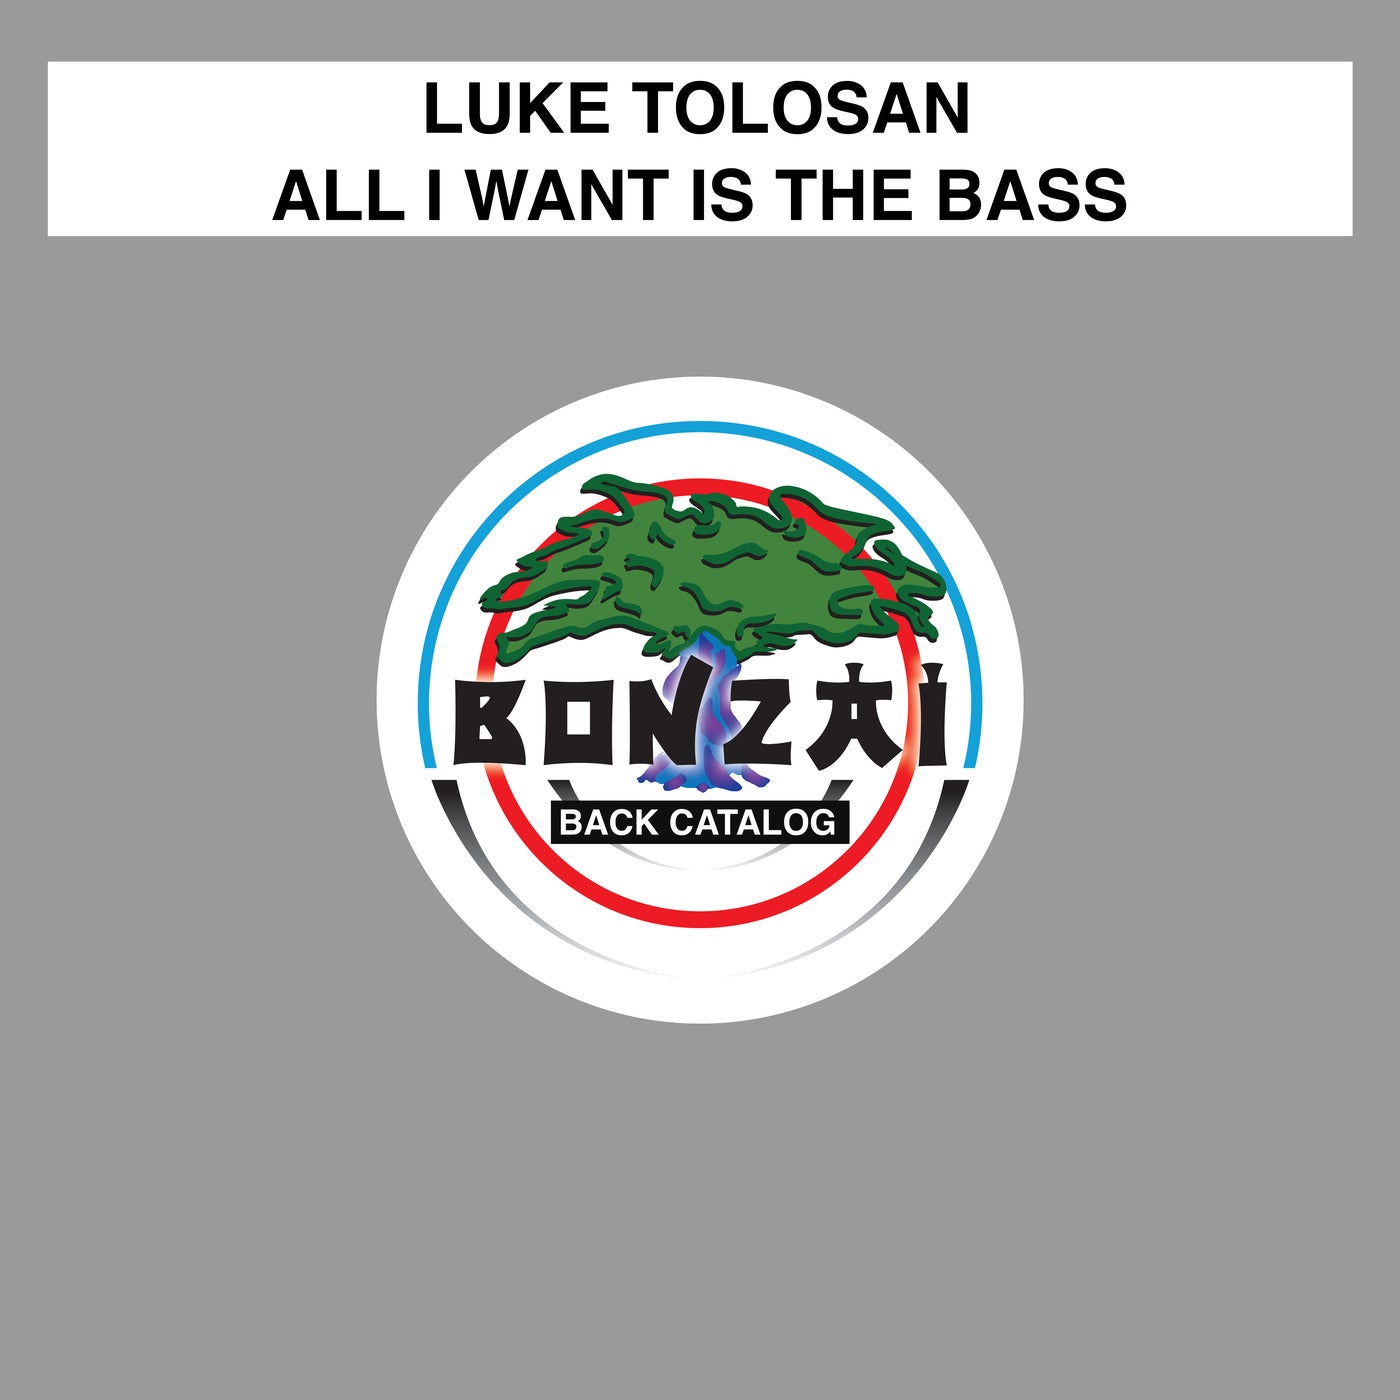 All I Want Is The Bass